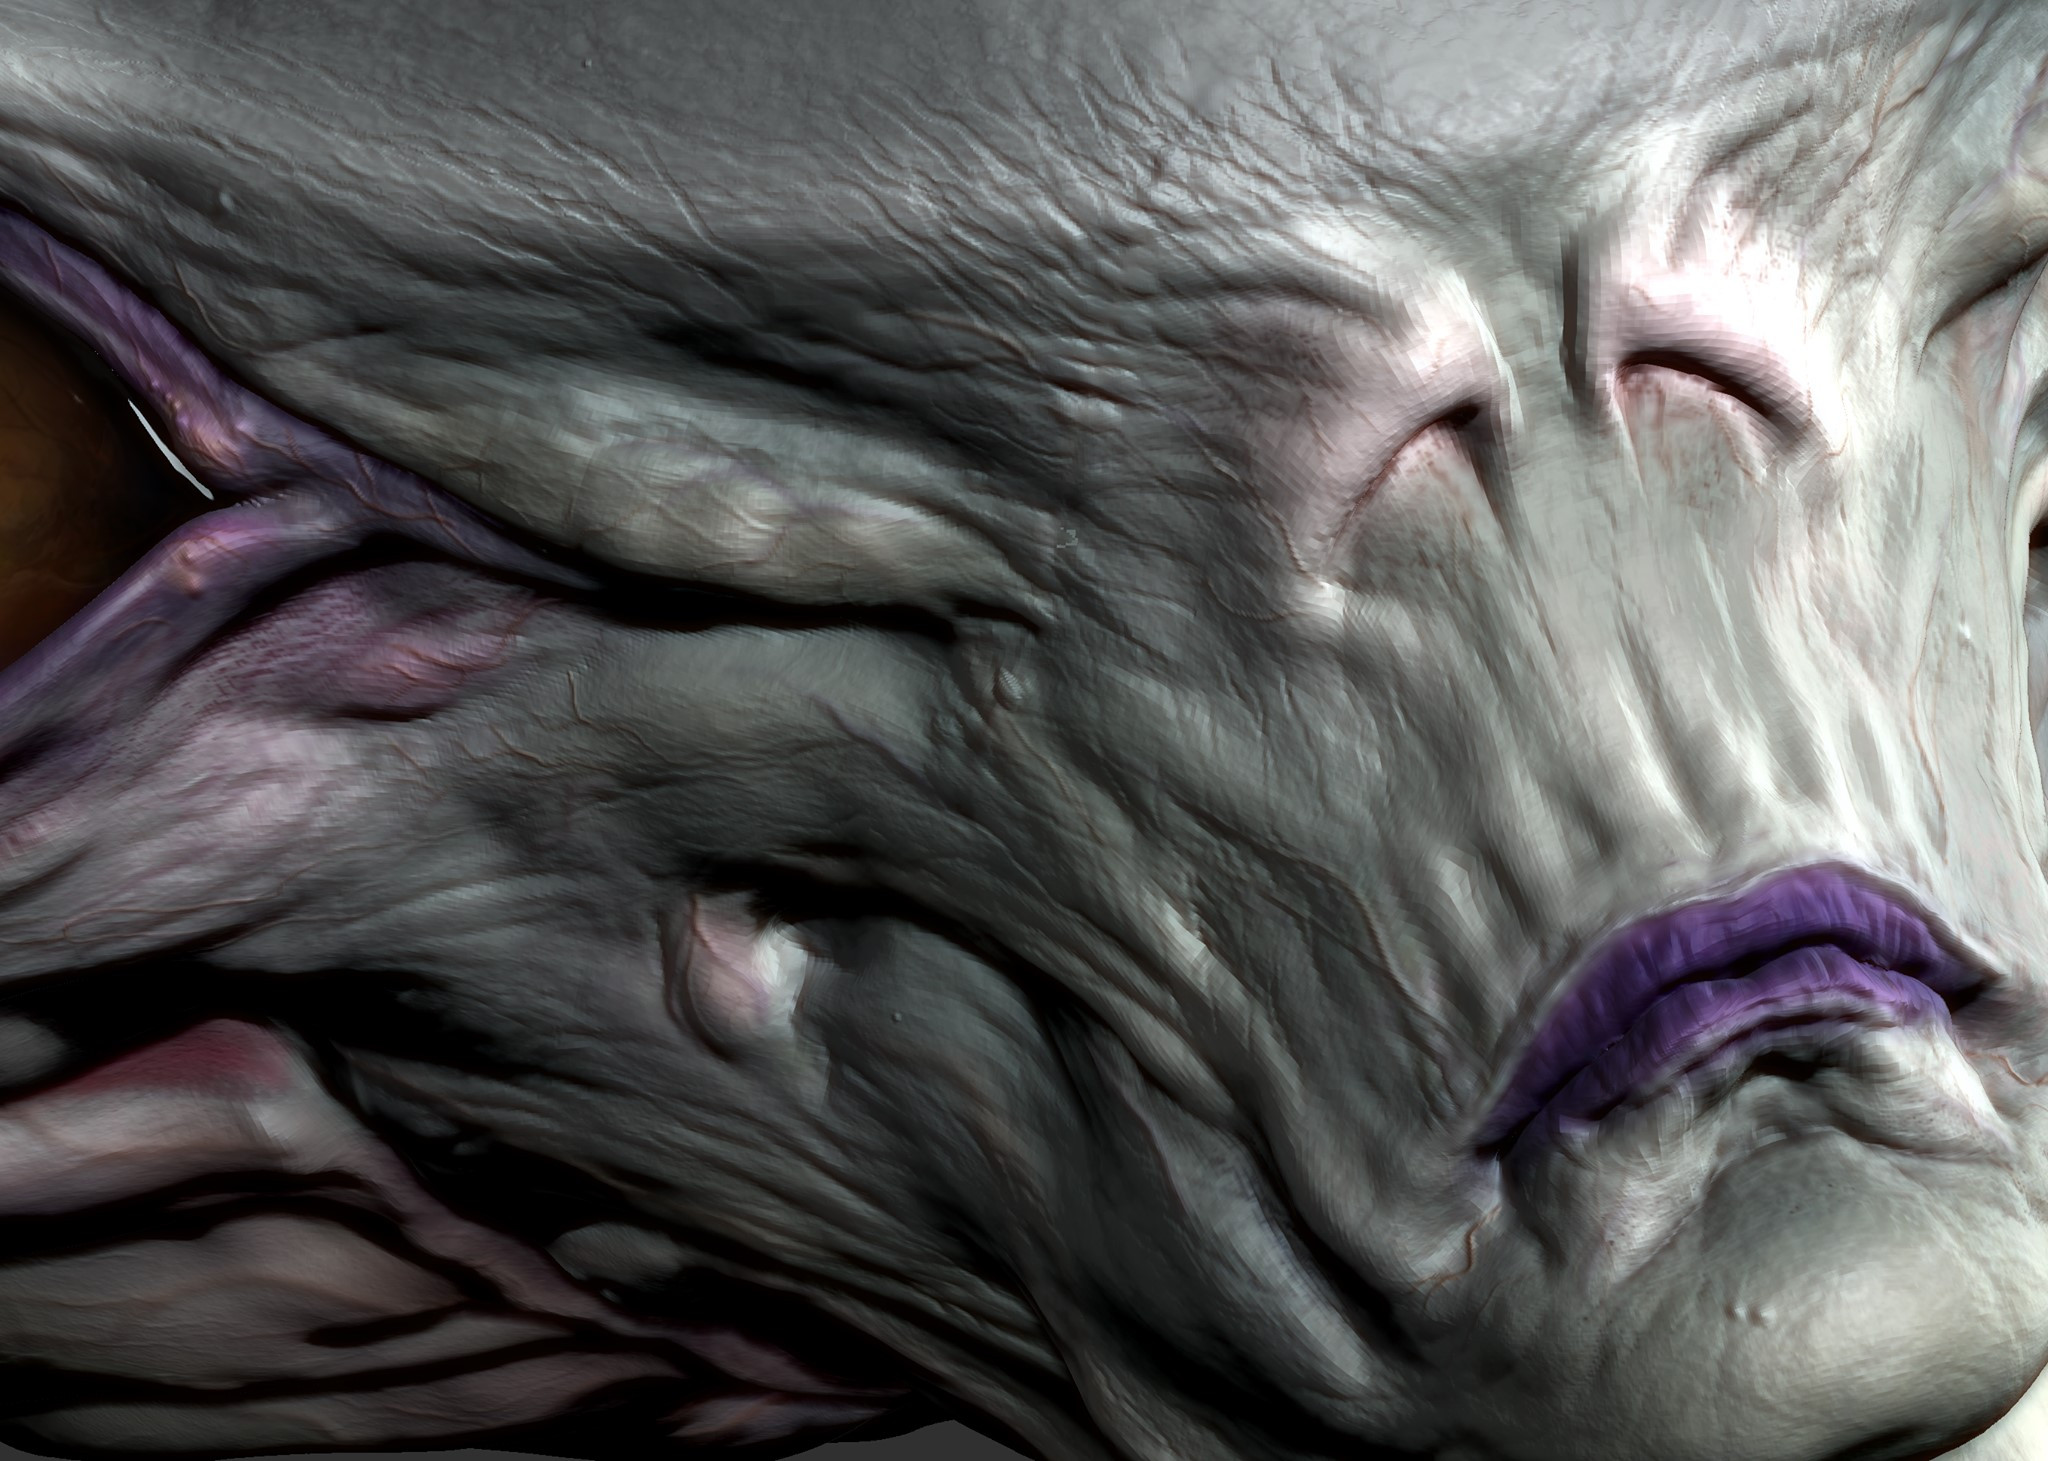 Crop of the Zbrush viewport from the tertiary stage. 